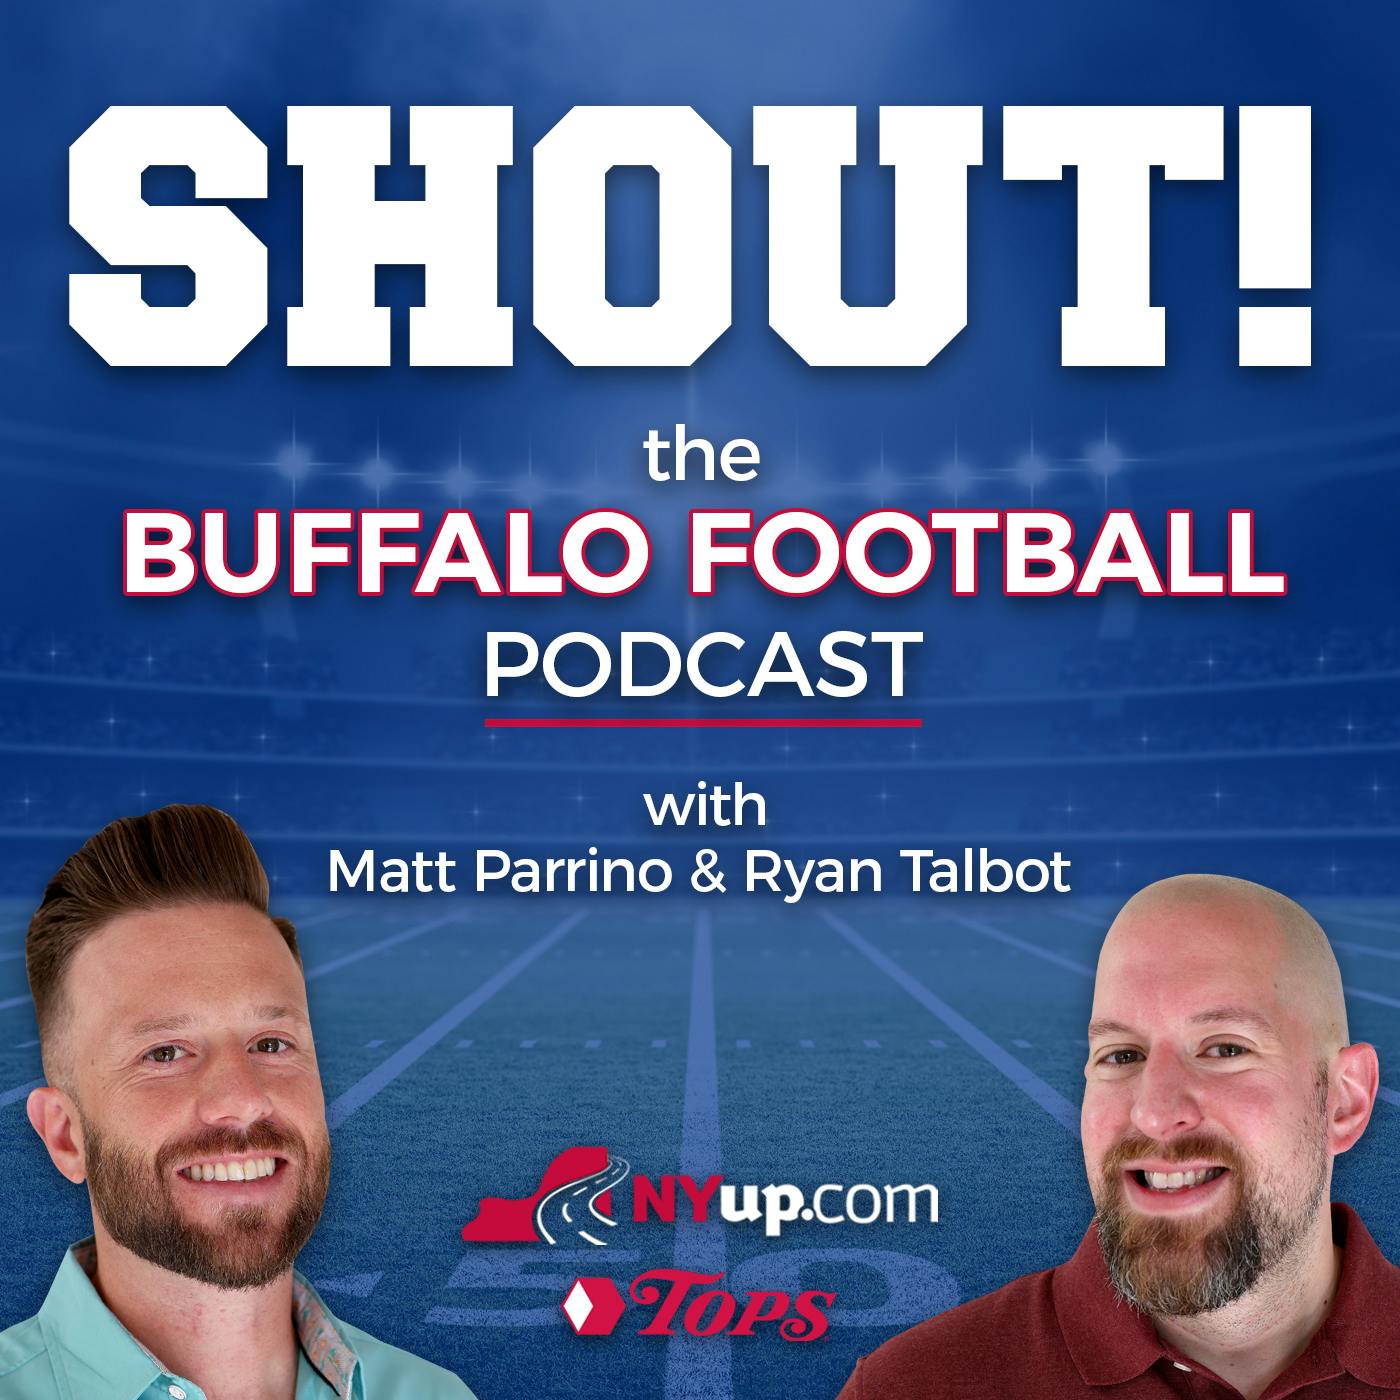 Bills blow out Raiders: What to make of Spencer Brown's dominant game, is Josh Allen back, and how Buffalo got run game going